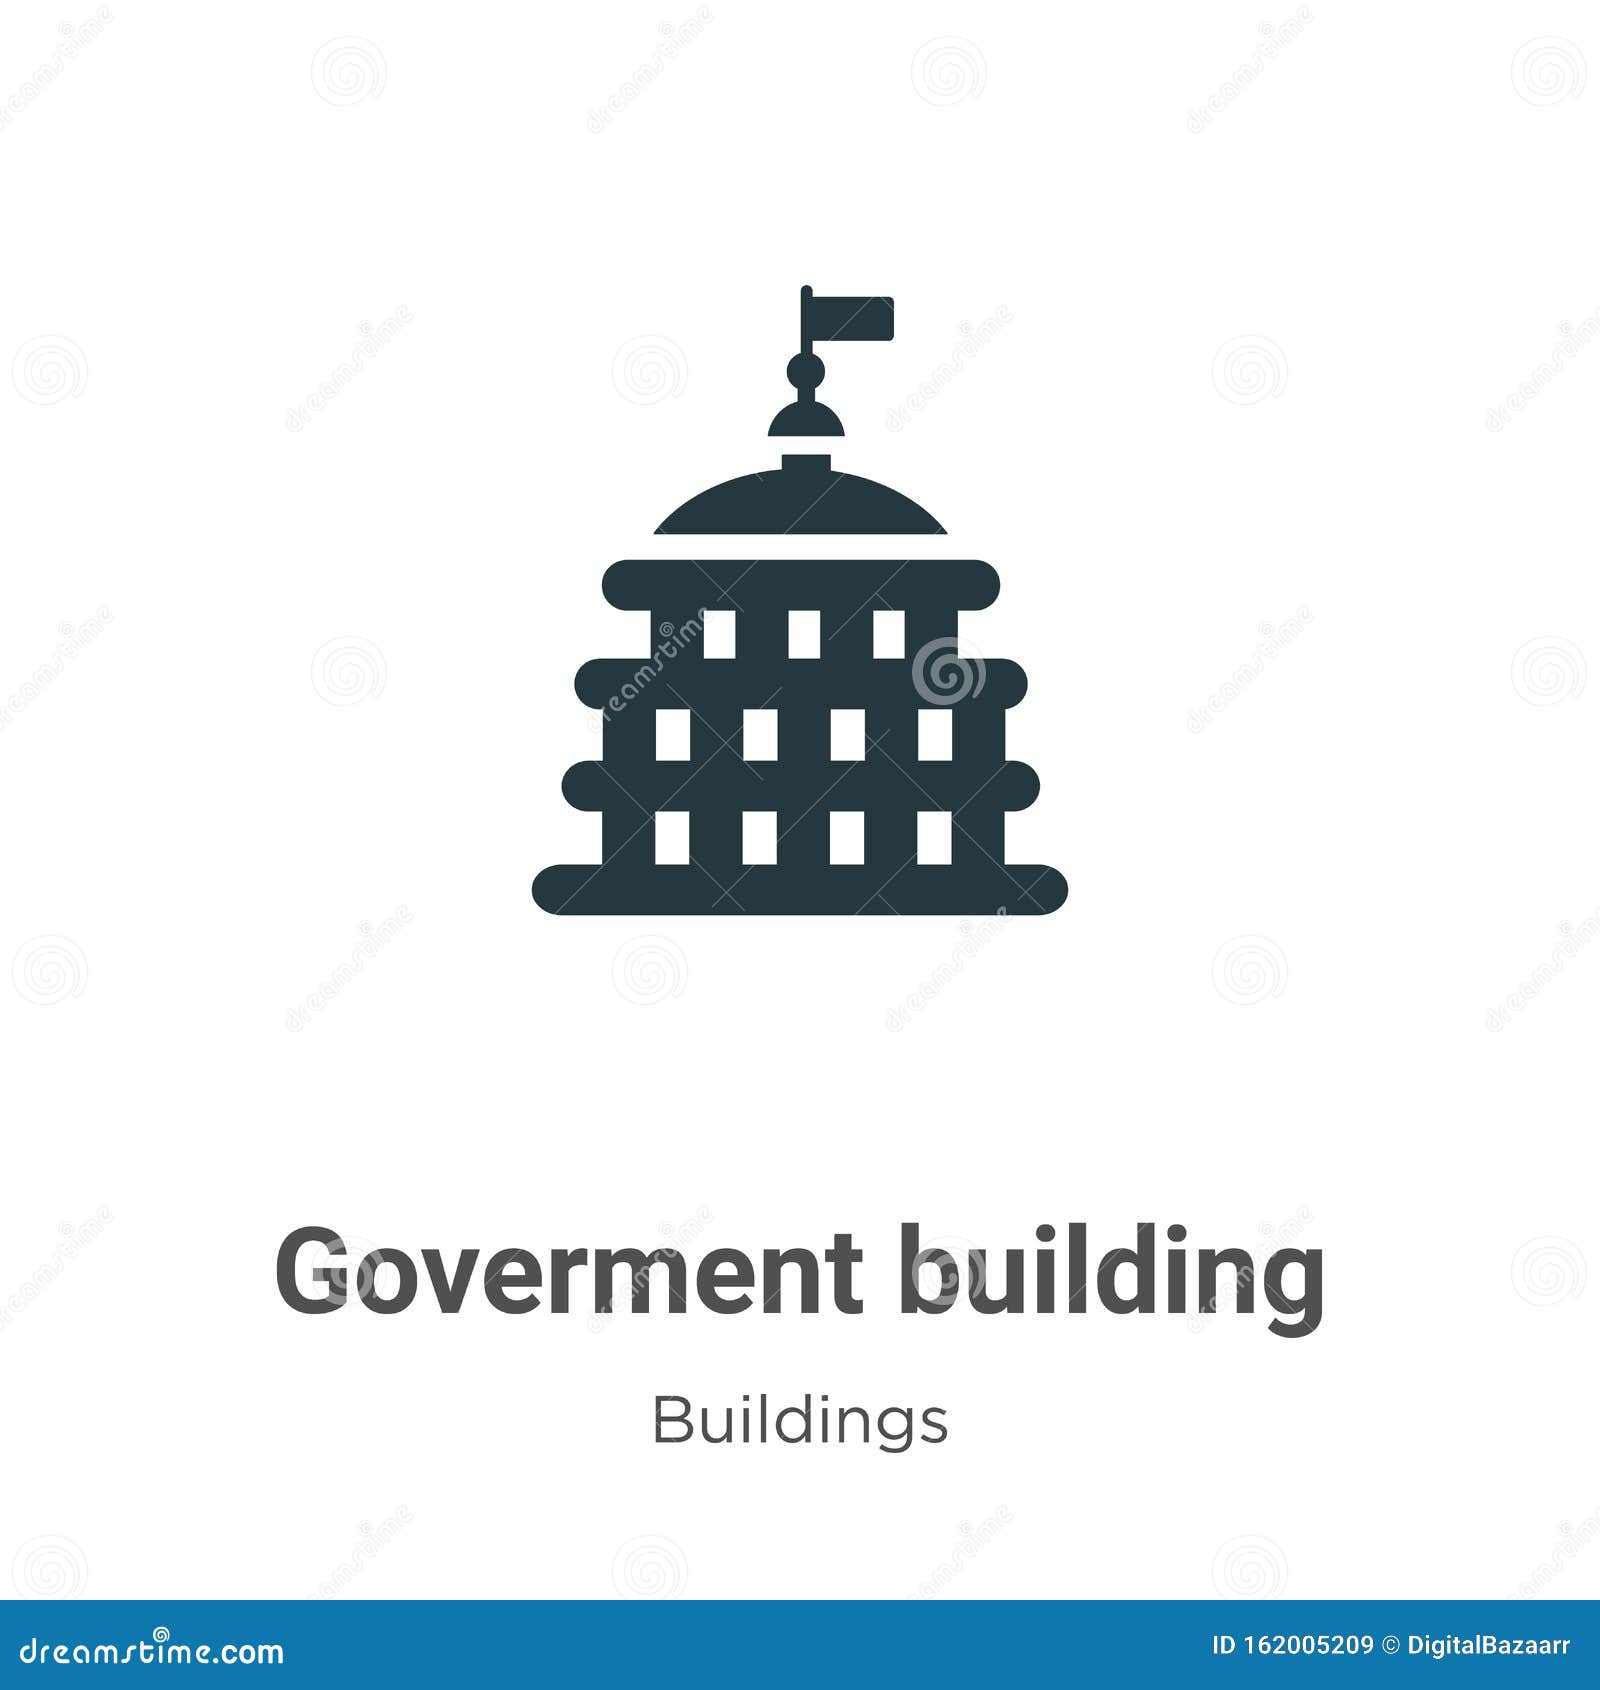 goverment building  icon on white background. flat  goverment building icon  sign from modern buildings